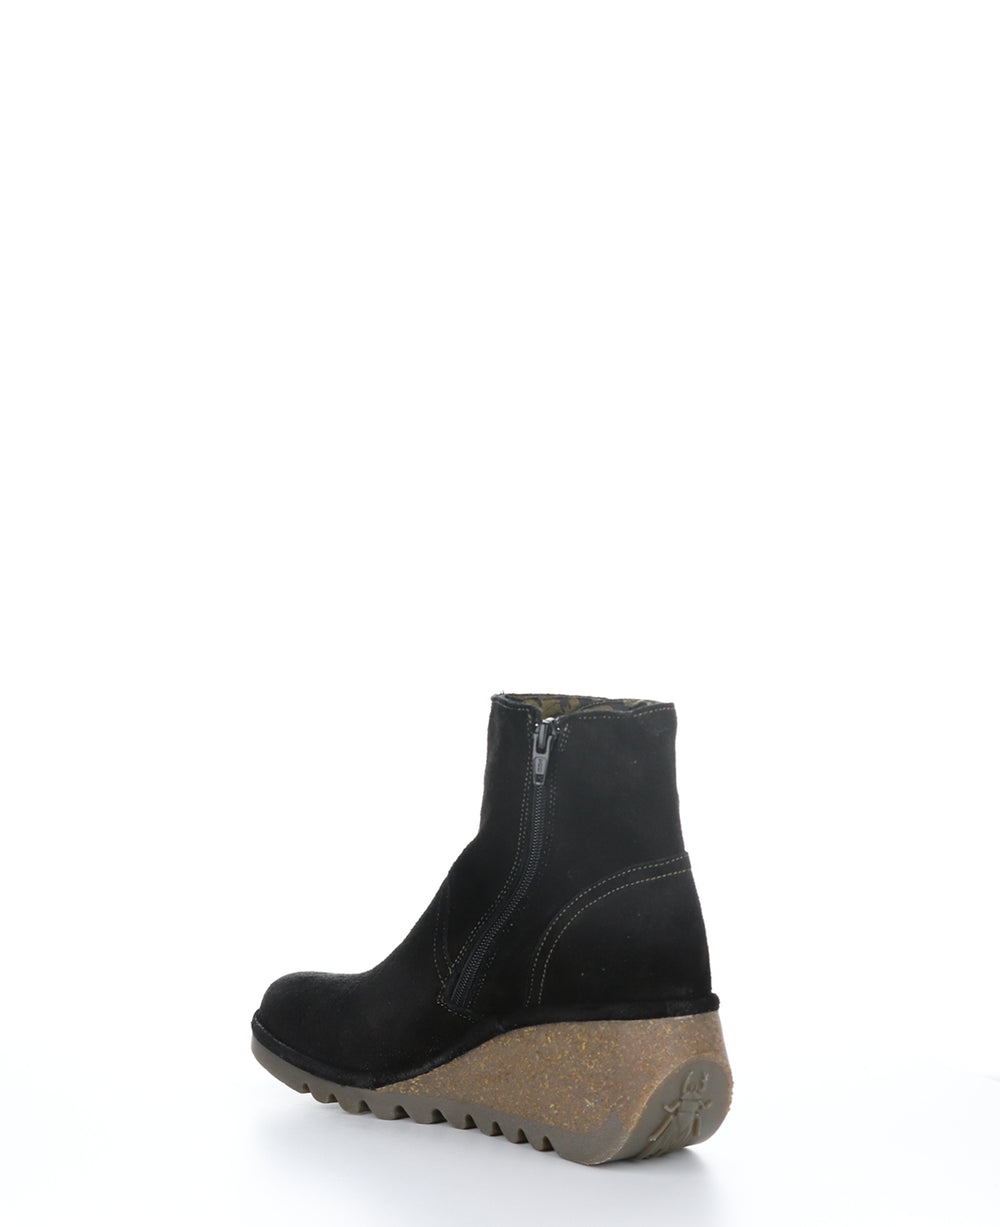 NERY336FLY Black Zip Up Ankle Boots